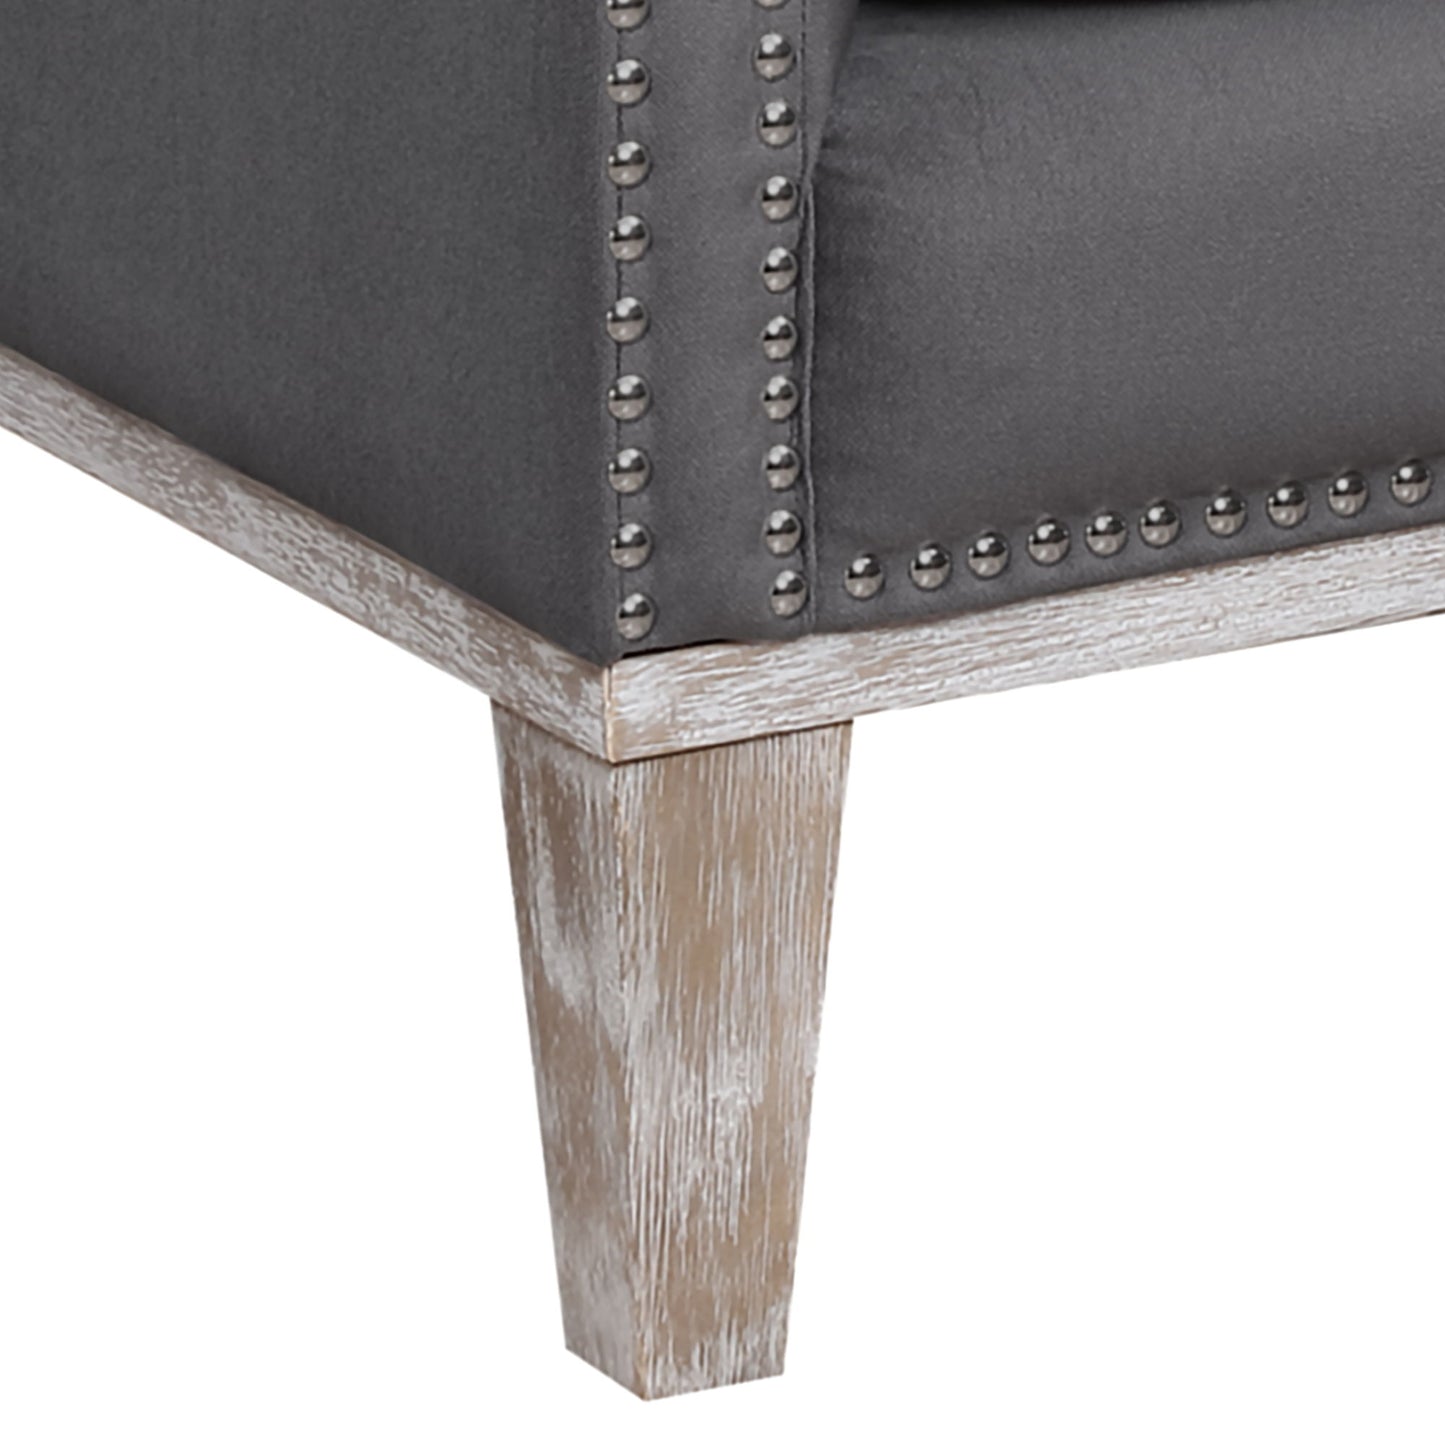 Augusta - Accent Chair - Charcoal